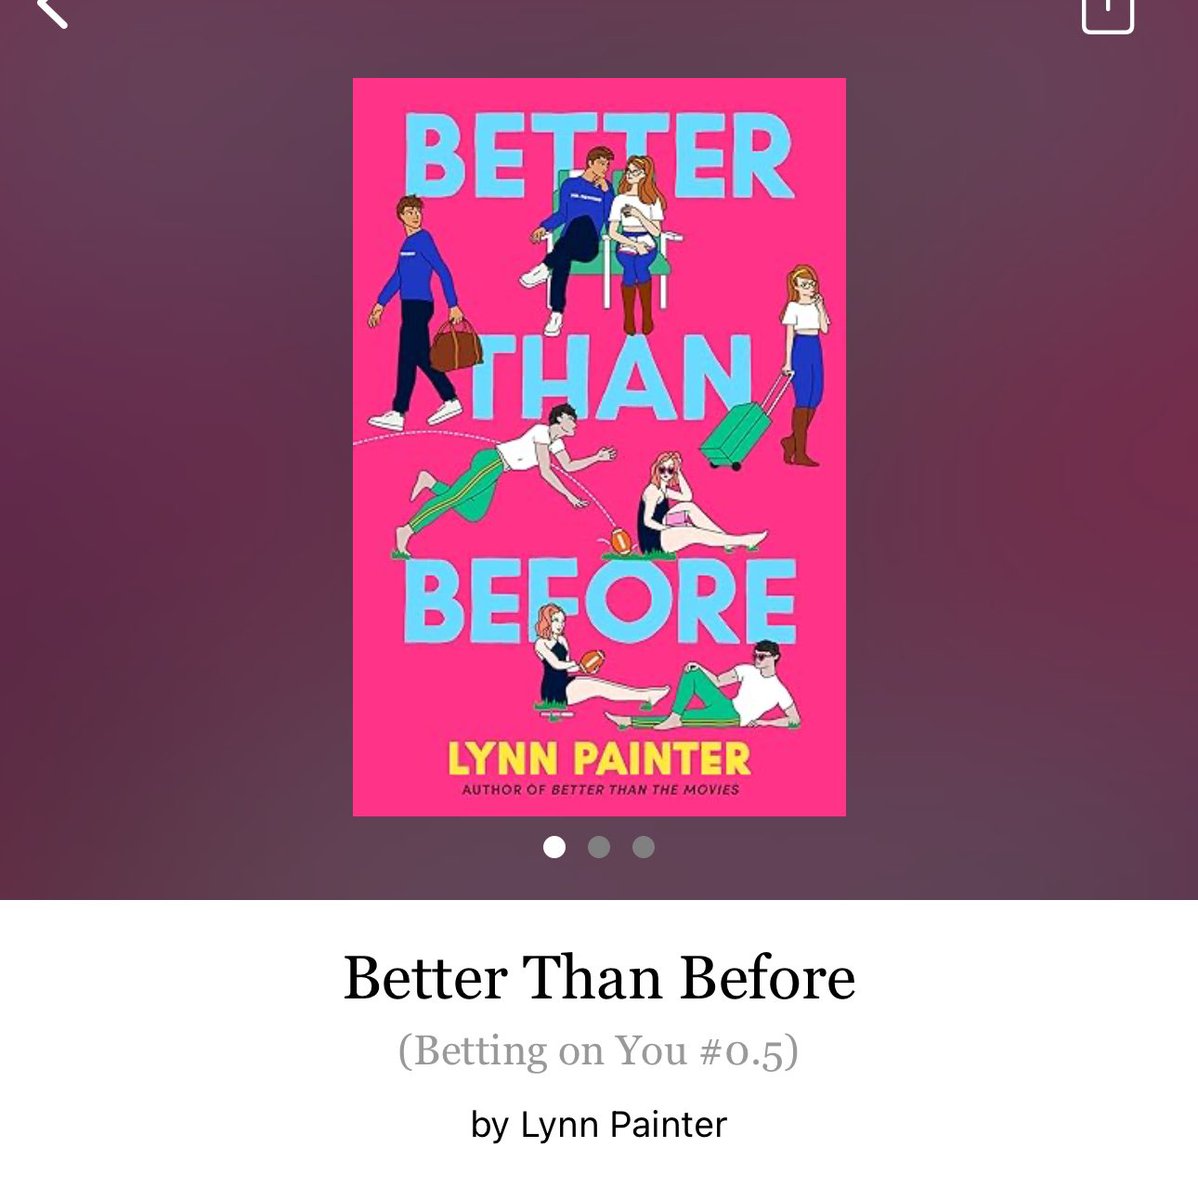 Better Than Before by Lynn Painter 

#BetterThanBefore by #LynnPainter #5745 #30pages #1286of400 #Series #kindle #SimonTeen #Novella #17for5 #Book.5of1 #BettingOnYouSeries #WesCharlieLiz #december2023 #clearingoffreadingshelves #whatsnext #readitquick